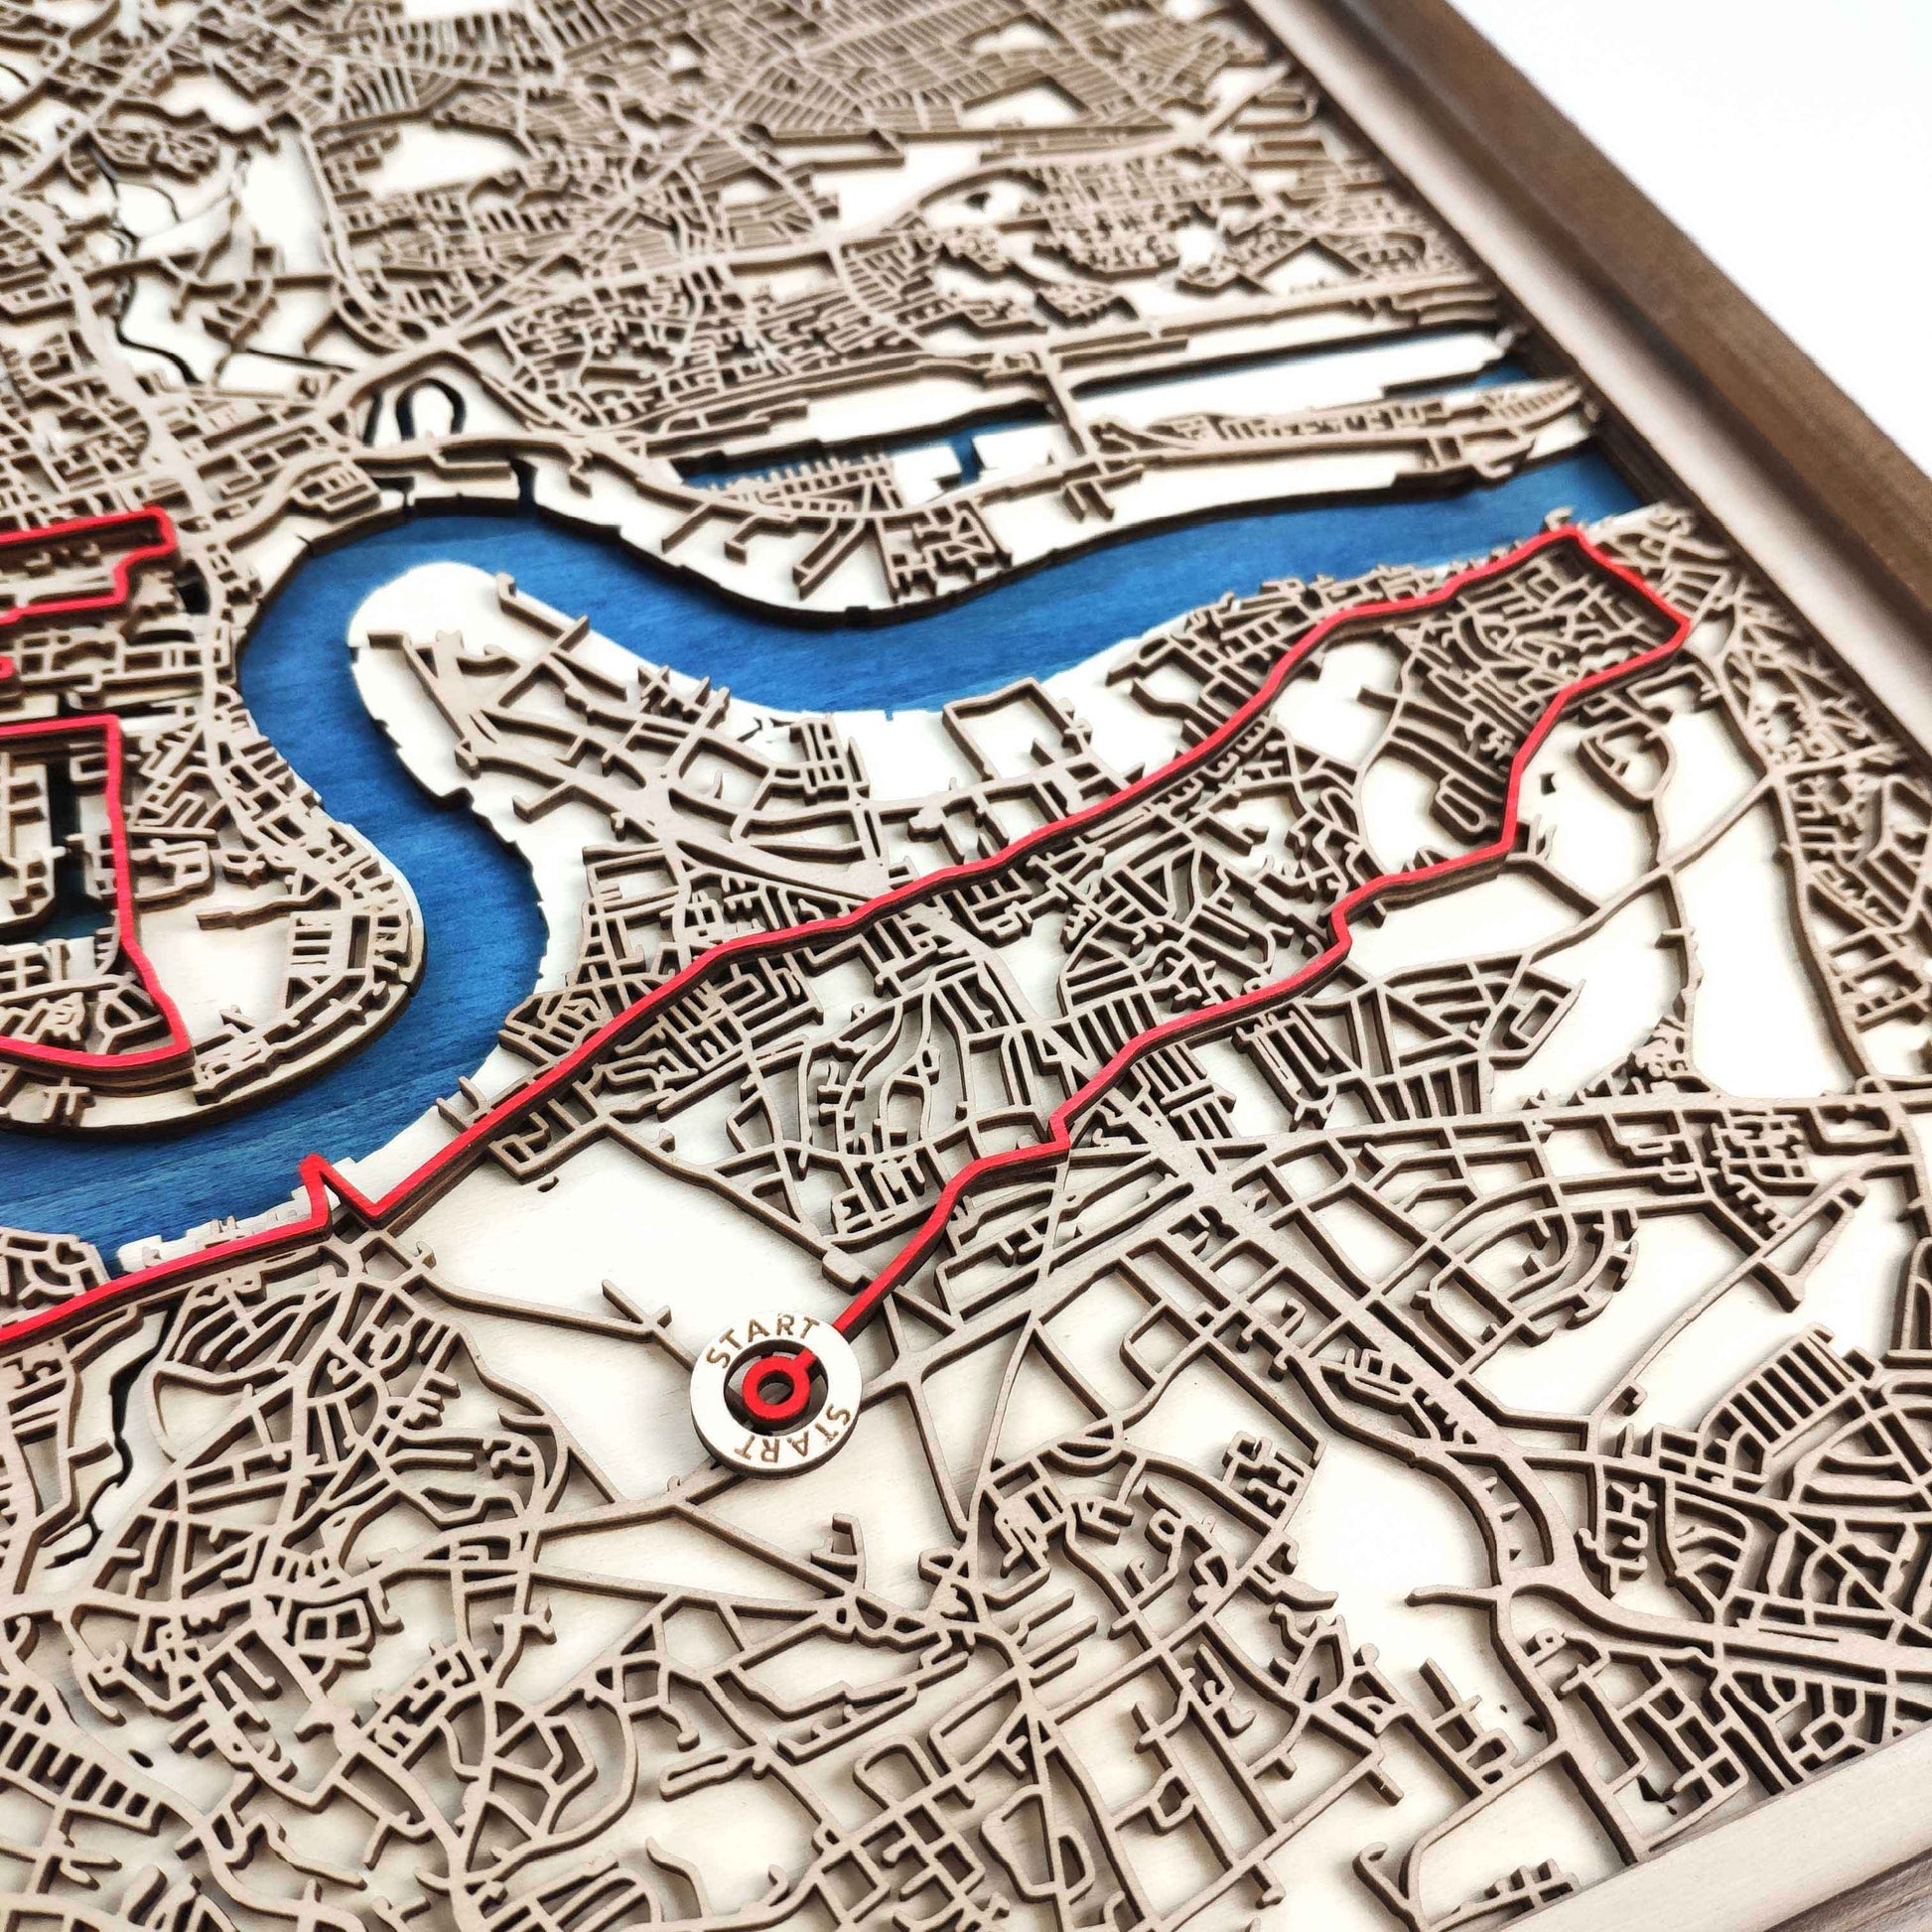 London Marathon Laser-Cut Wooden Map – Unique Runner Poster Gift by CityWood - Custom Wood Map Art - Unique Laser Cut Engraved - Anniversary Gift